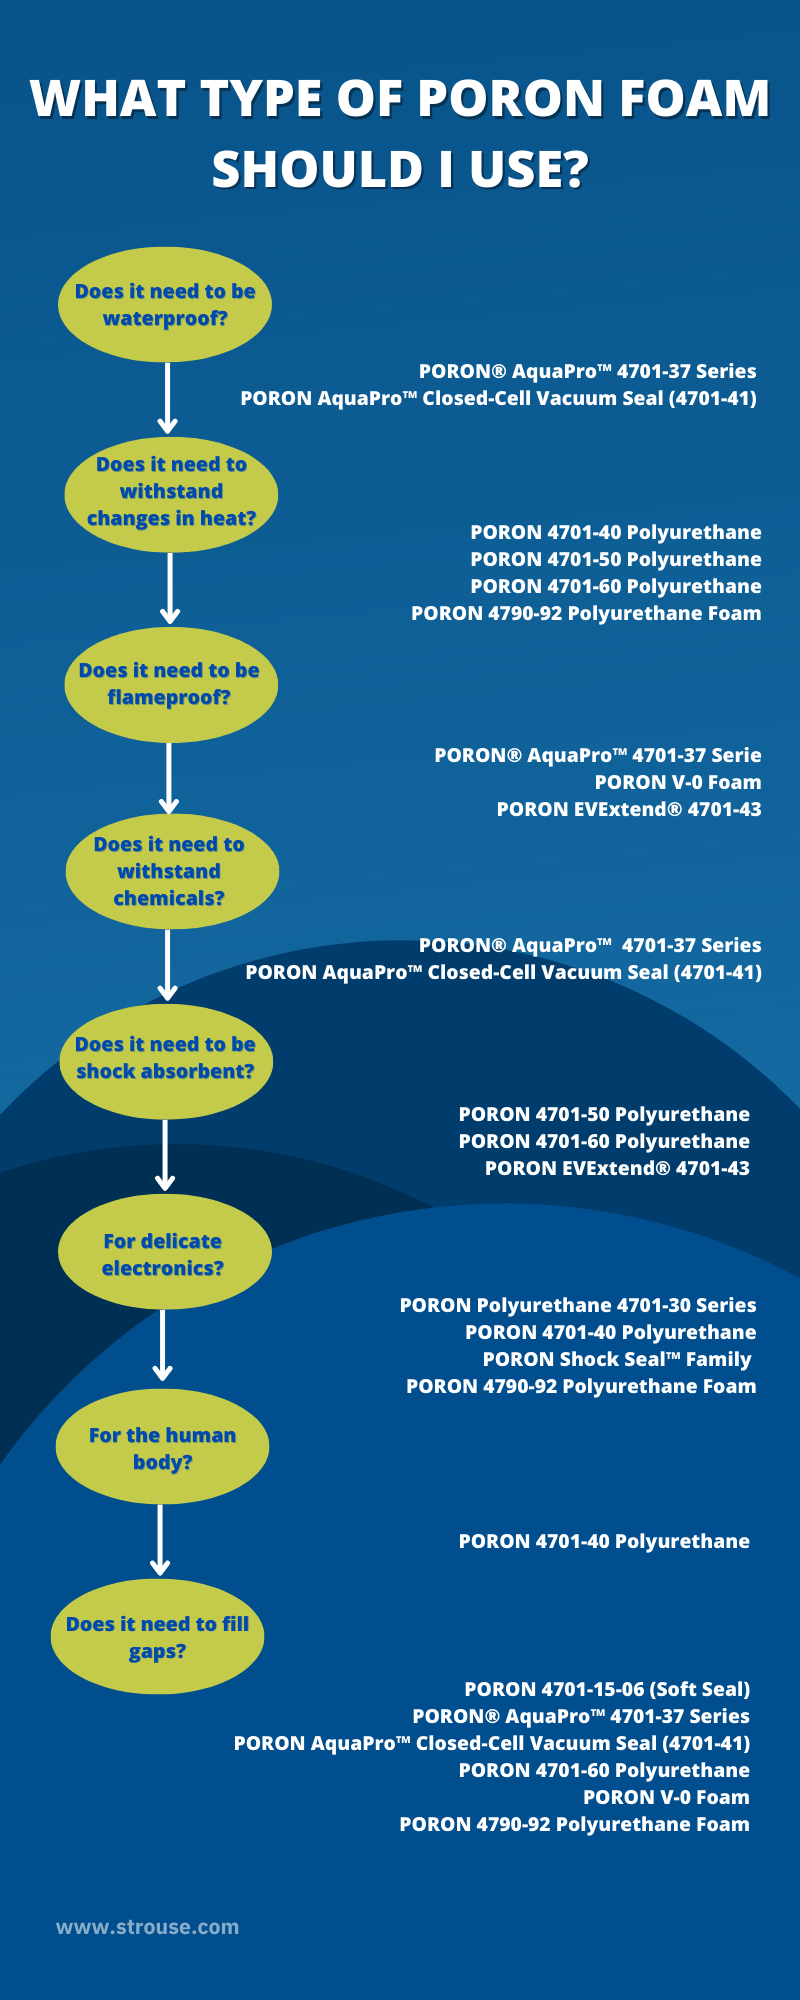 Types of Poron Foam based on pros and cons